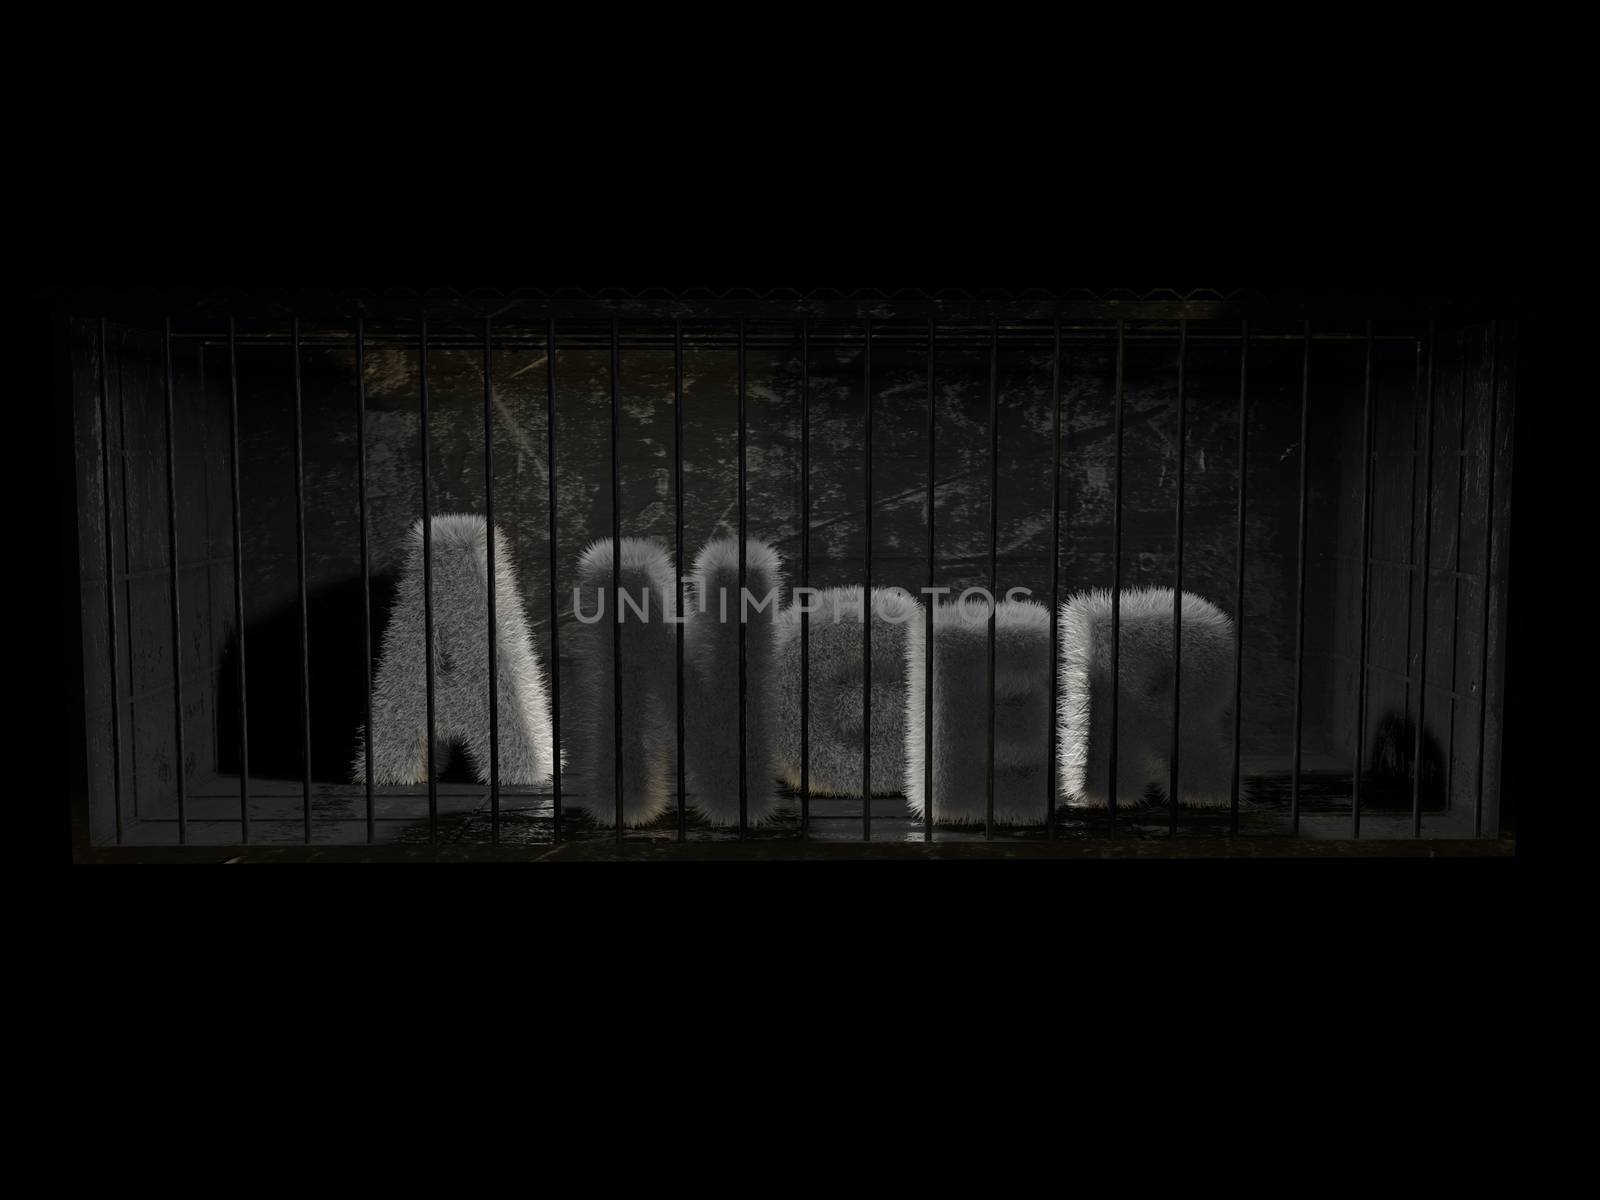 A fluffy word (anger) with white hair behind bars with black background.